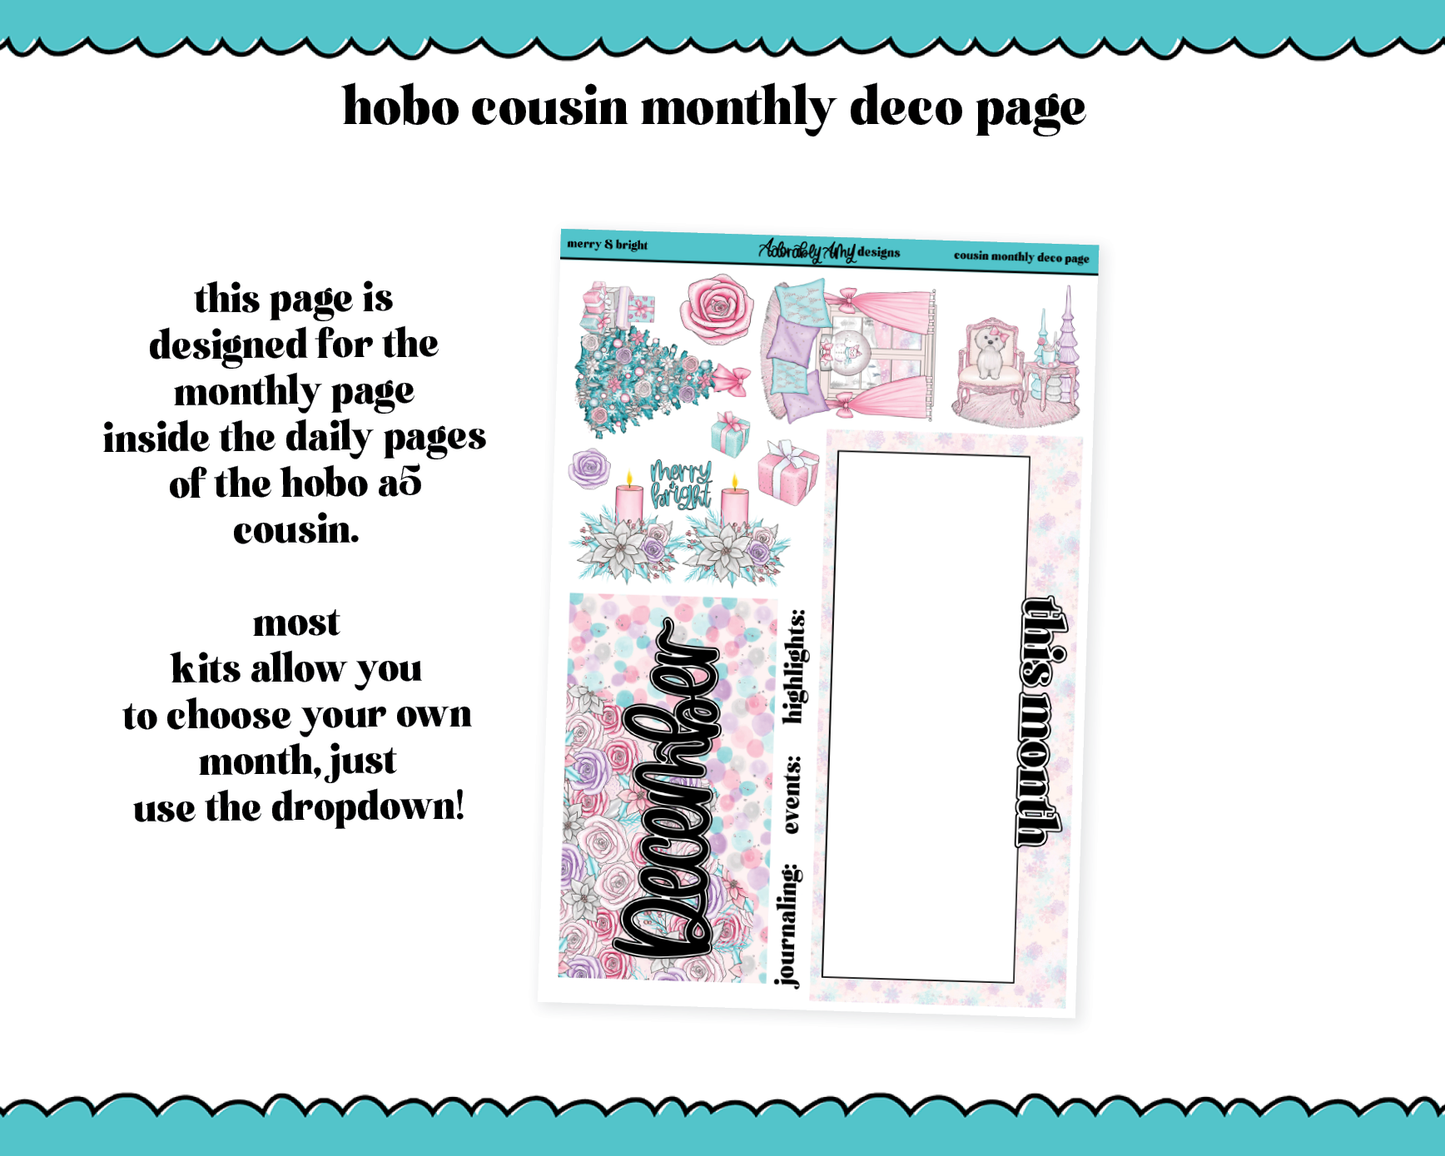 Hobonichi Cousin Monthly Pick Your Month Merry & Bright Planner Sticker Kit for Hobo Cousin or Similar Planners